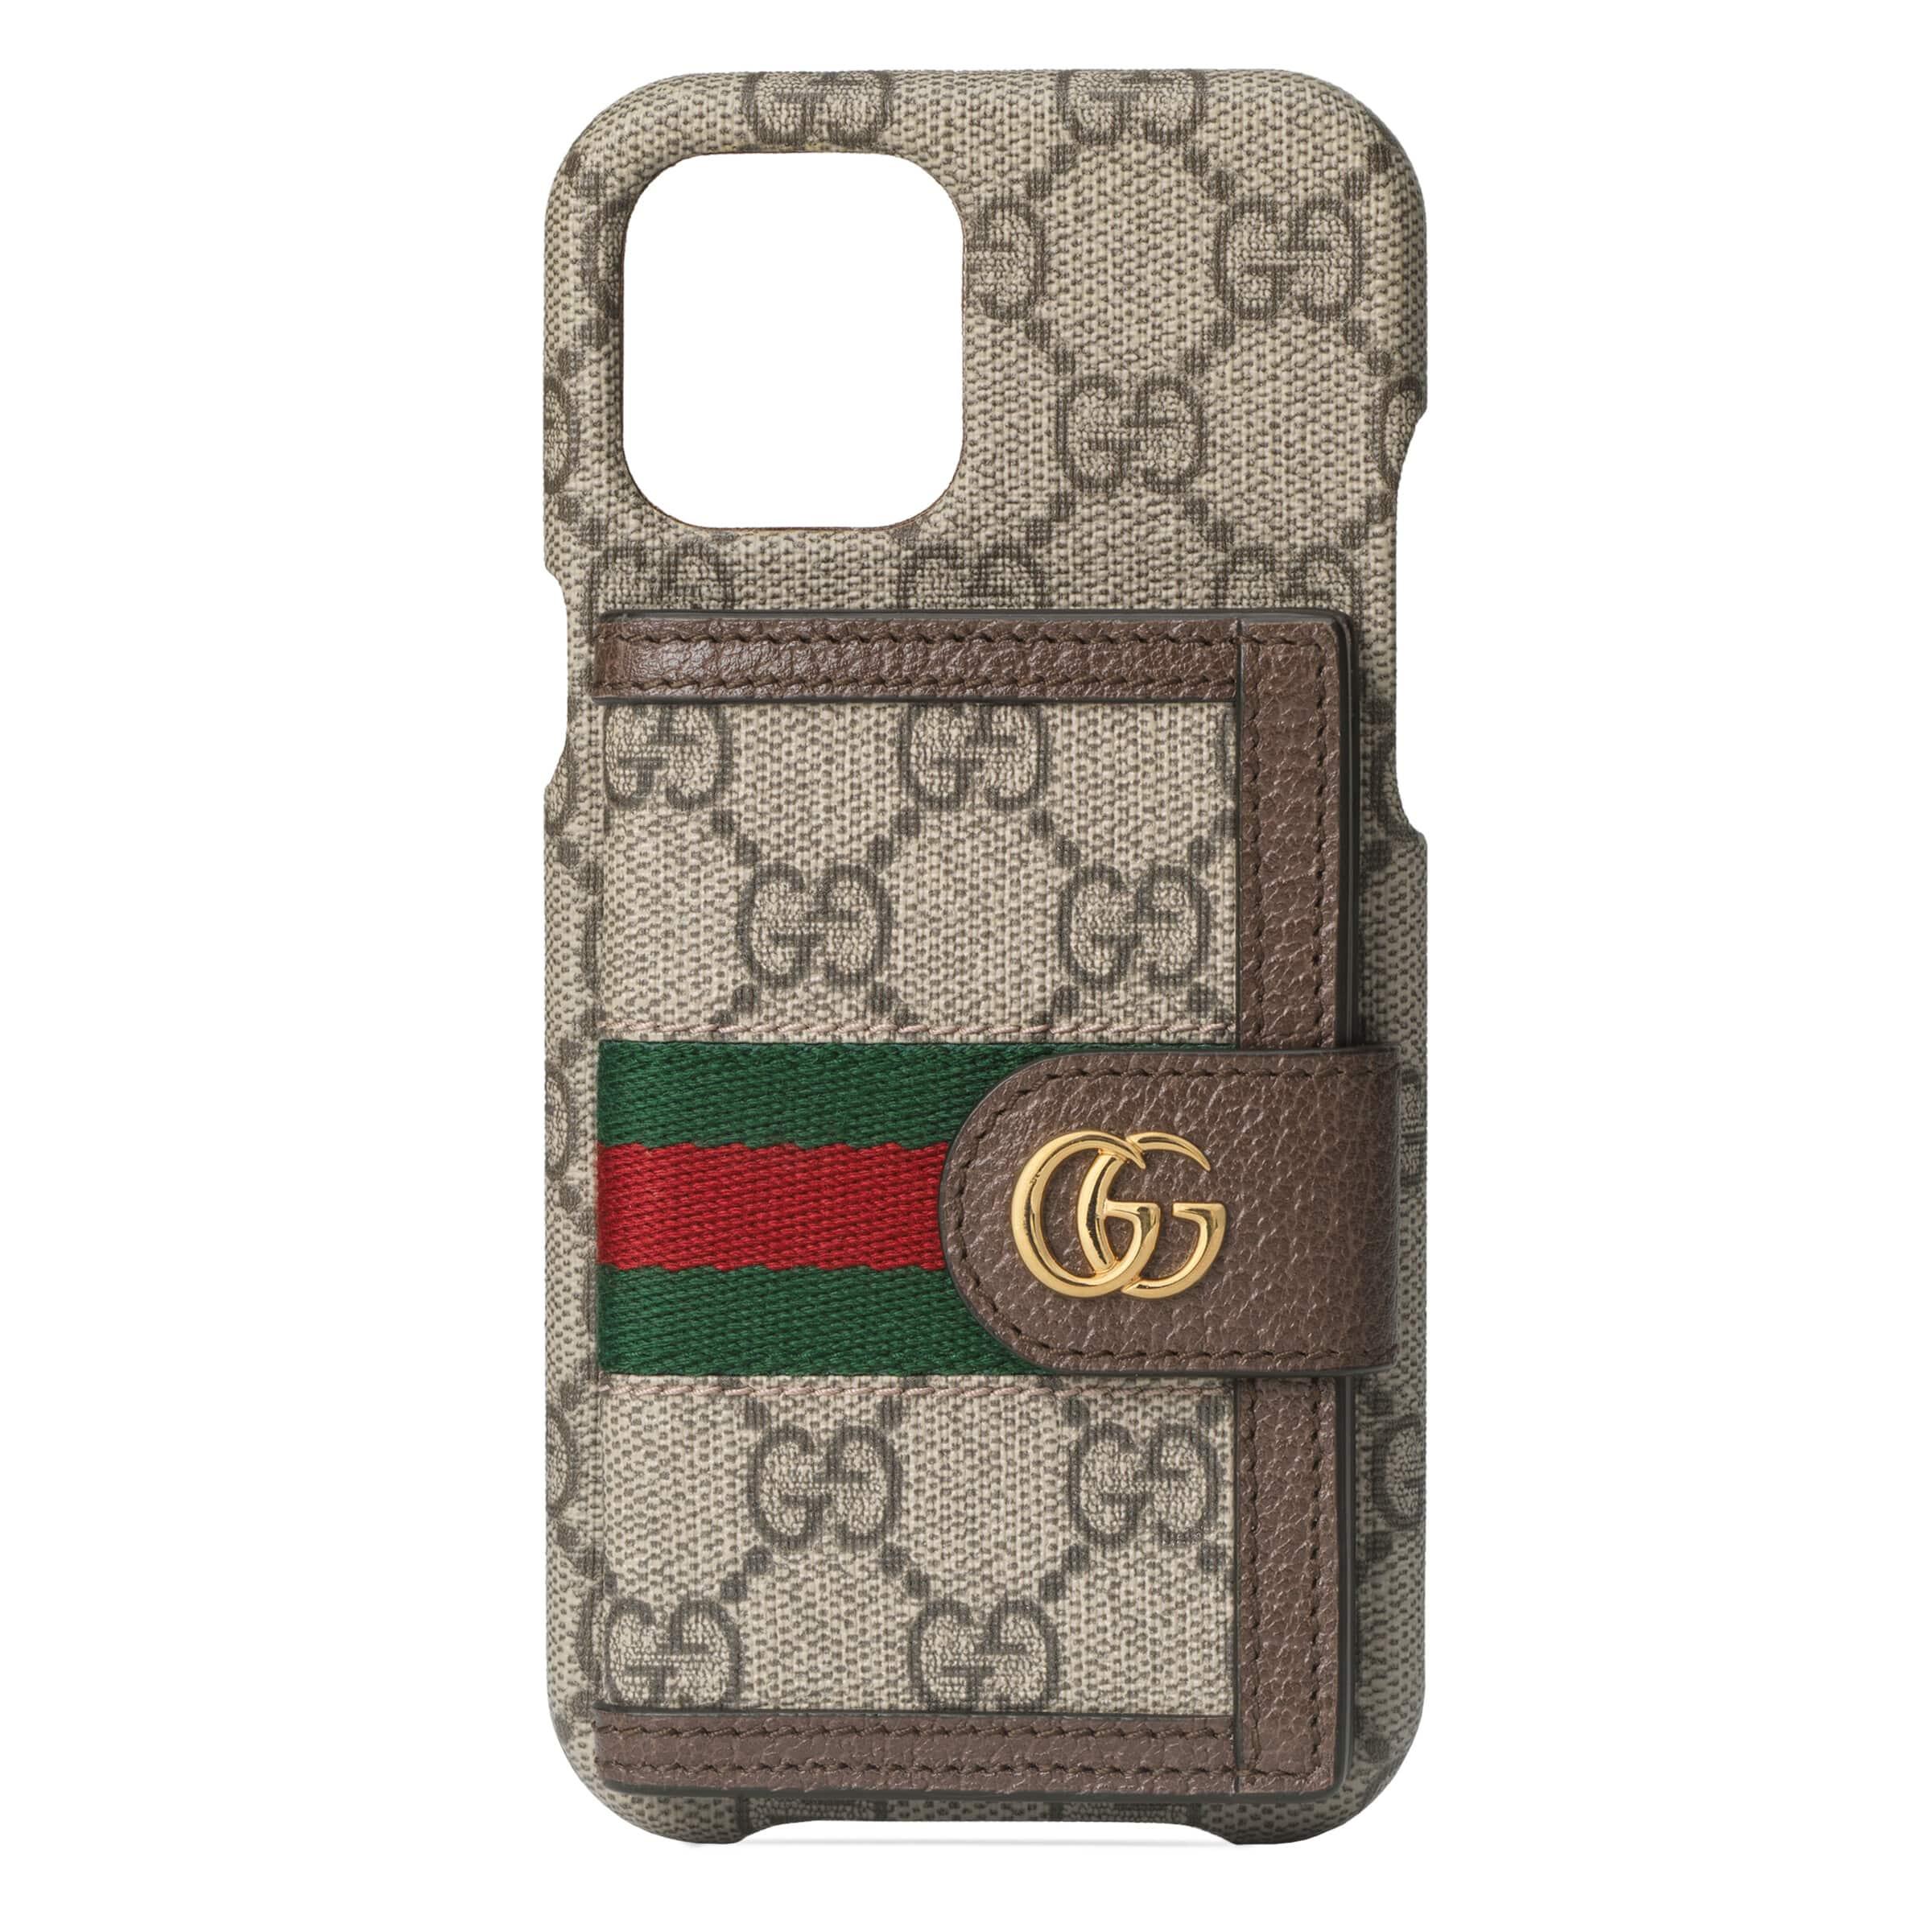 Gucci iPhone Cases 